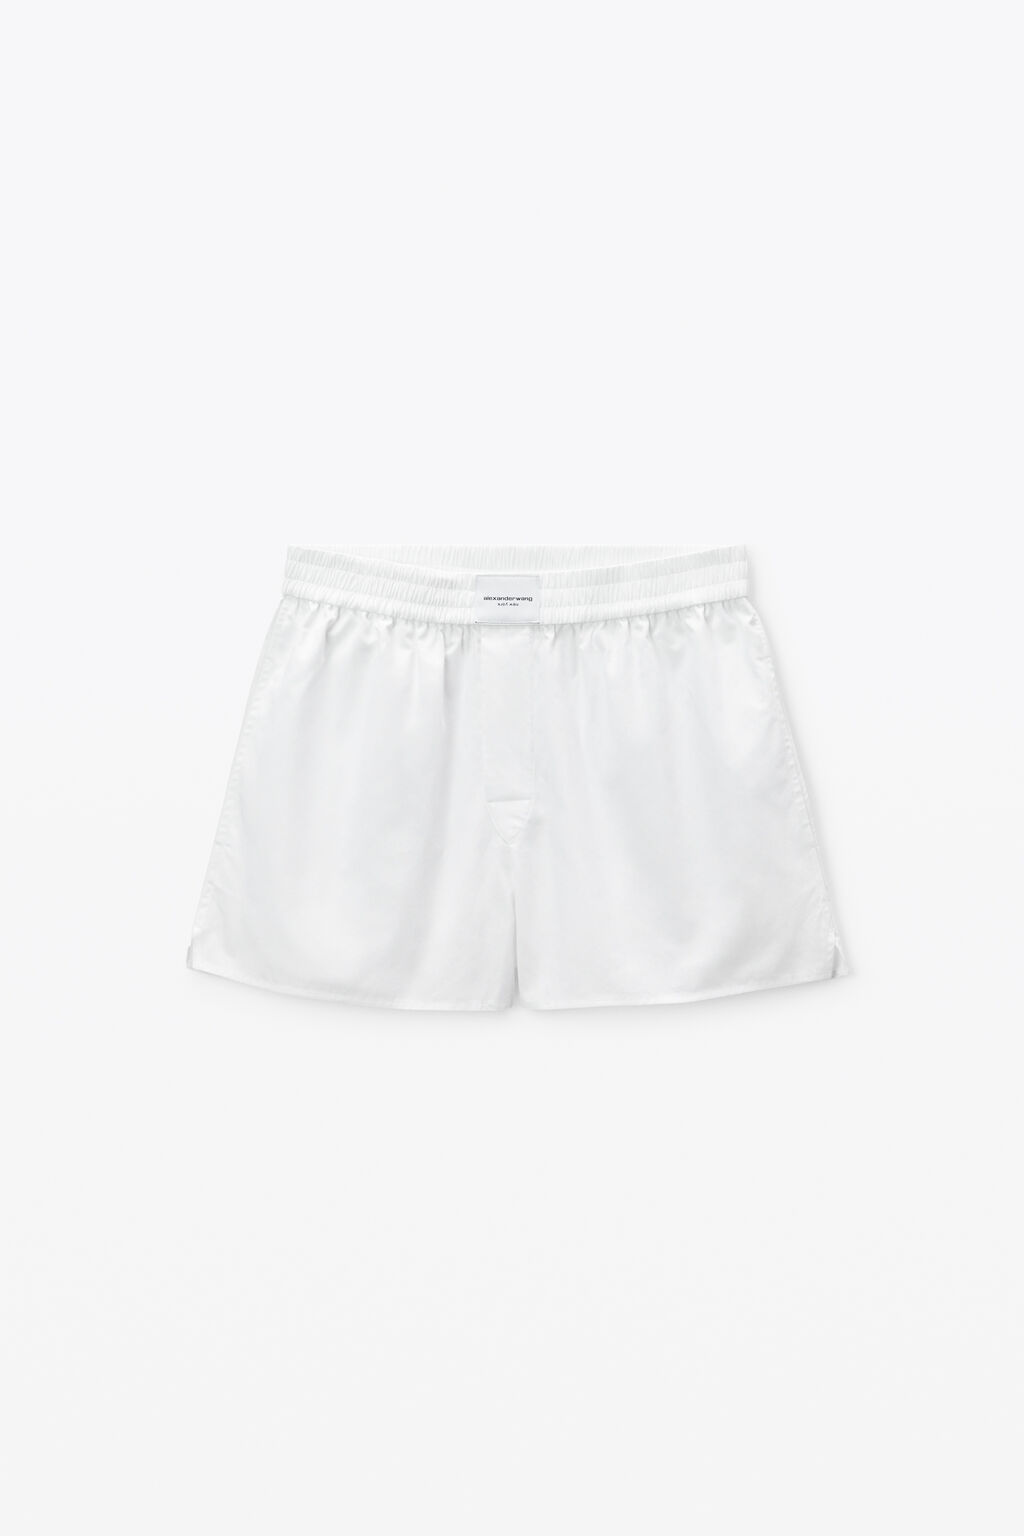 The East Village Boxer Short – Simply Boxers